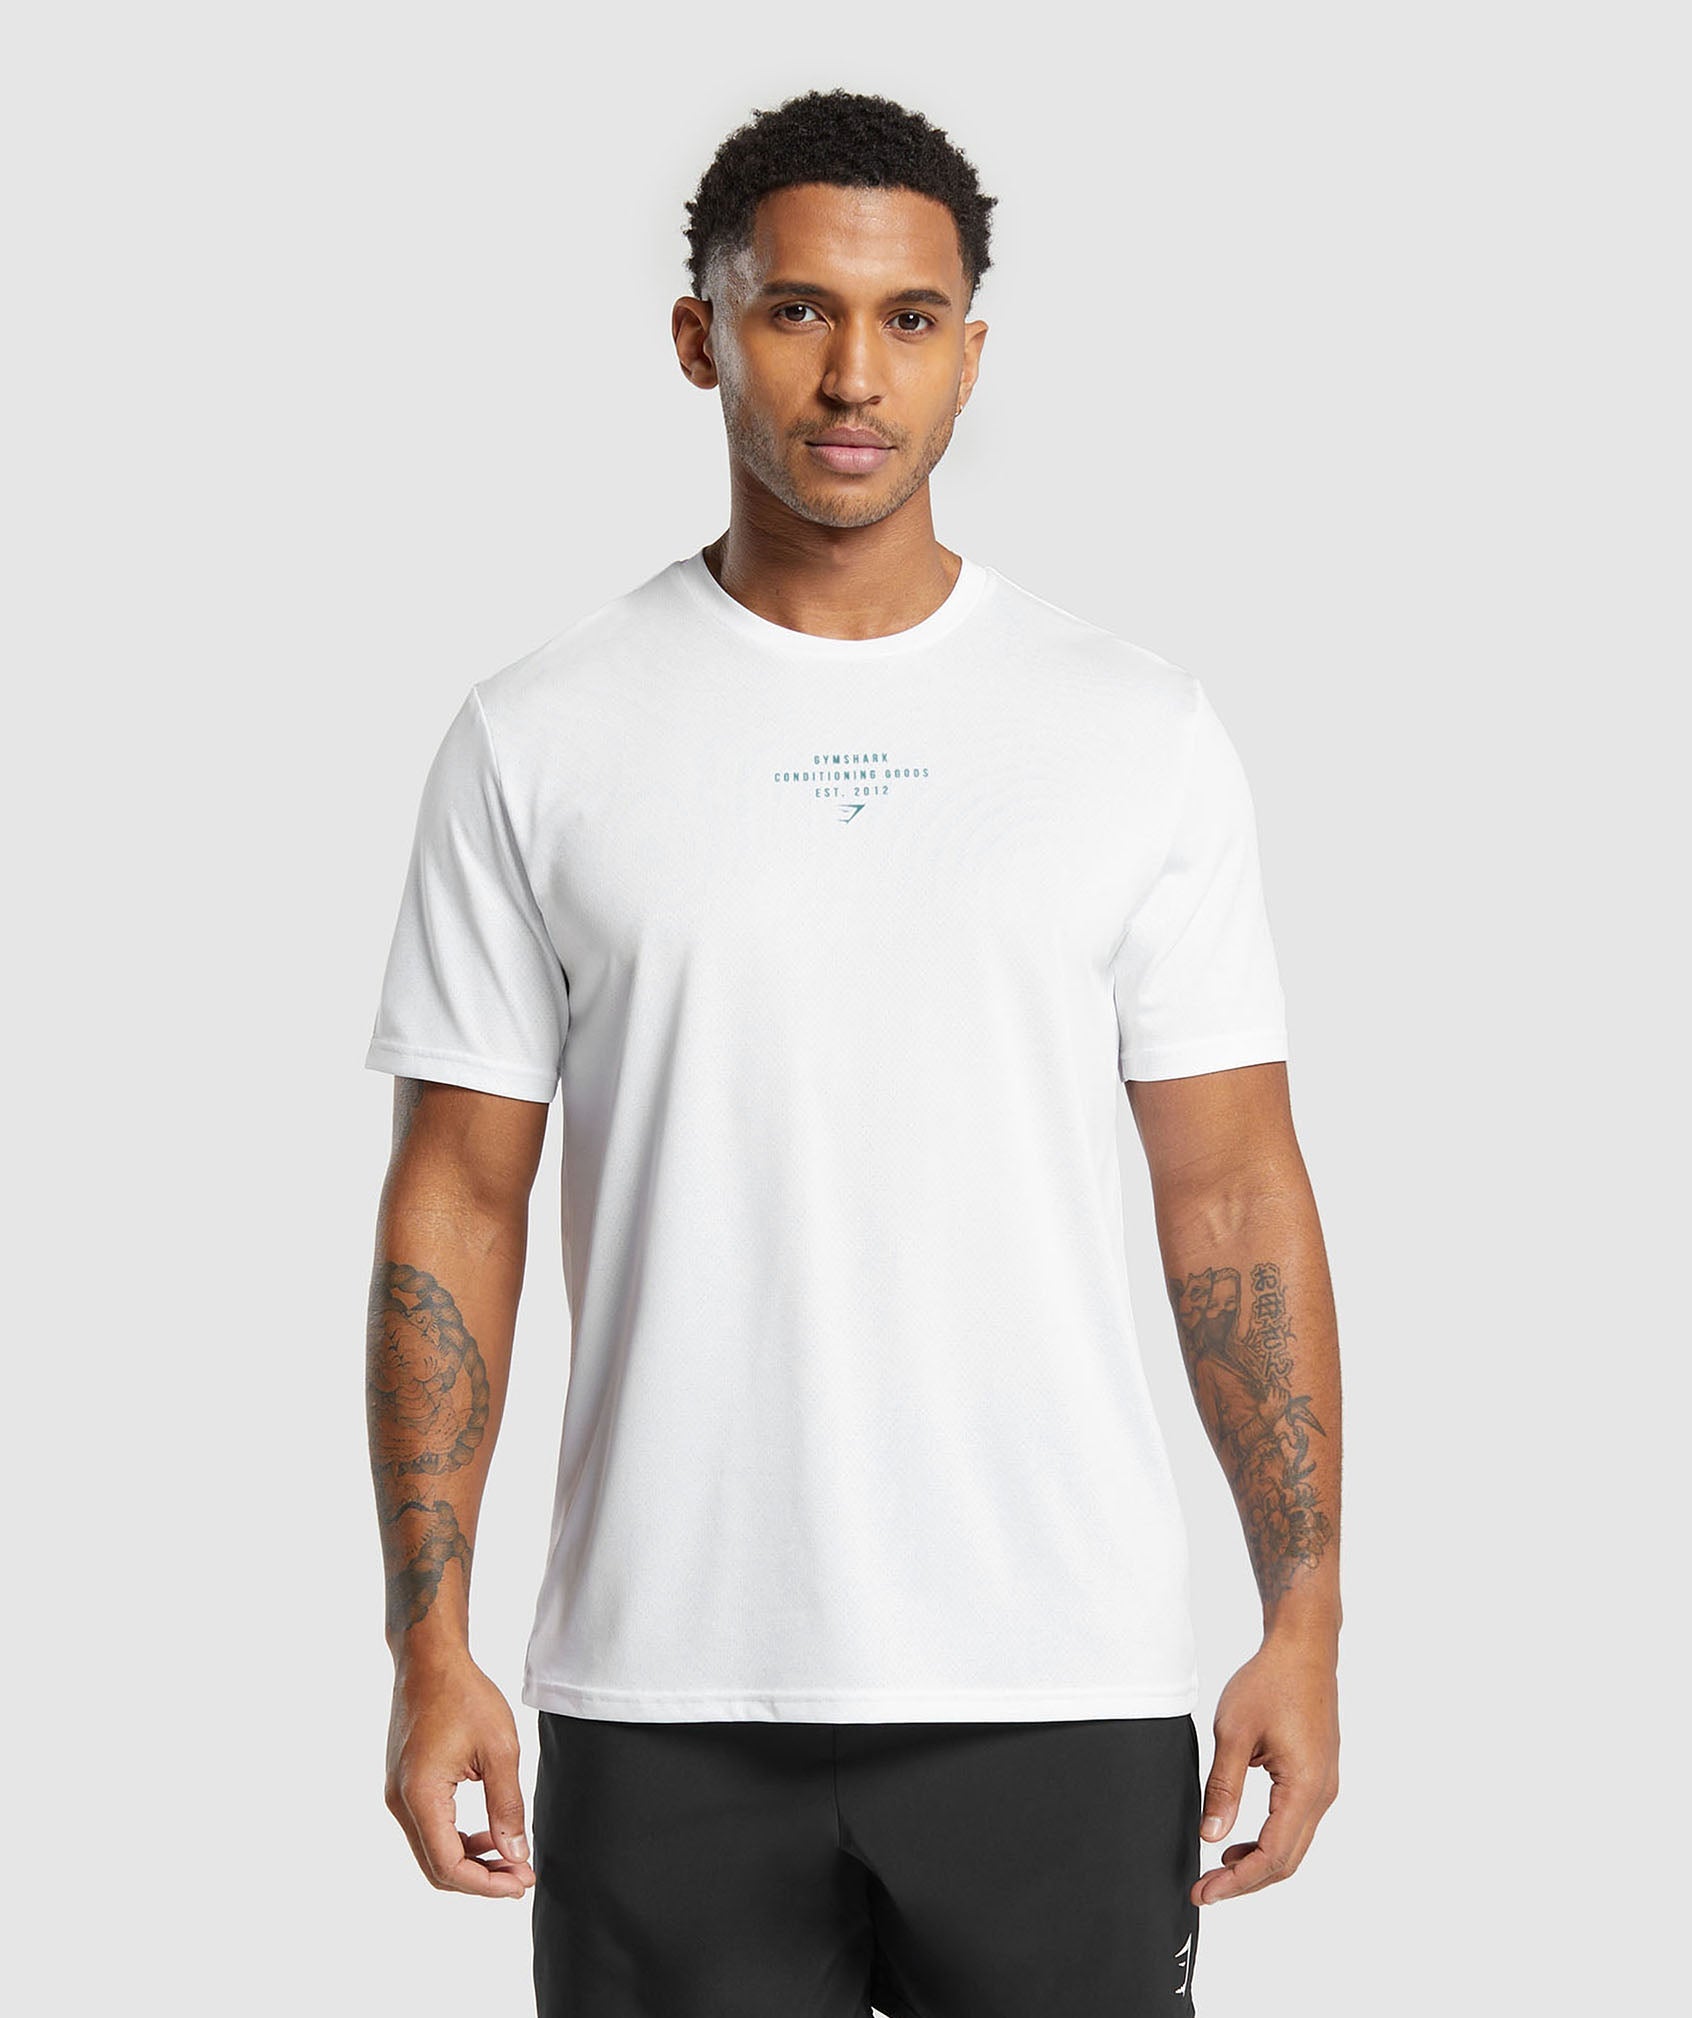 Conditioning Goods T-Shirt in White - view 1